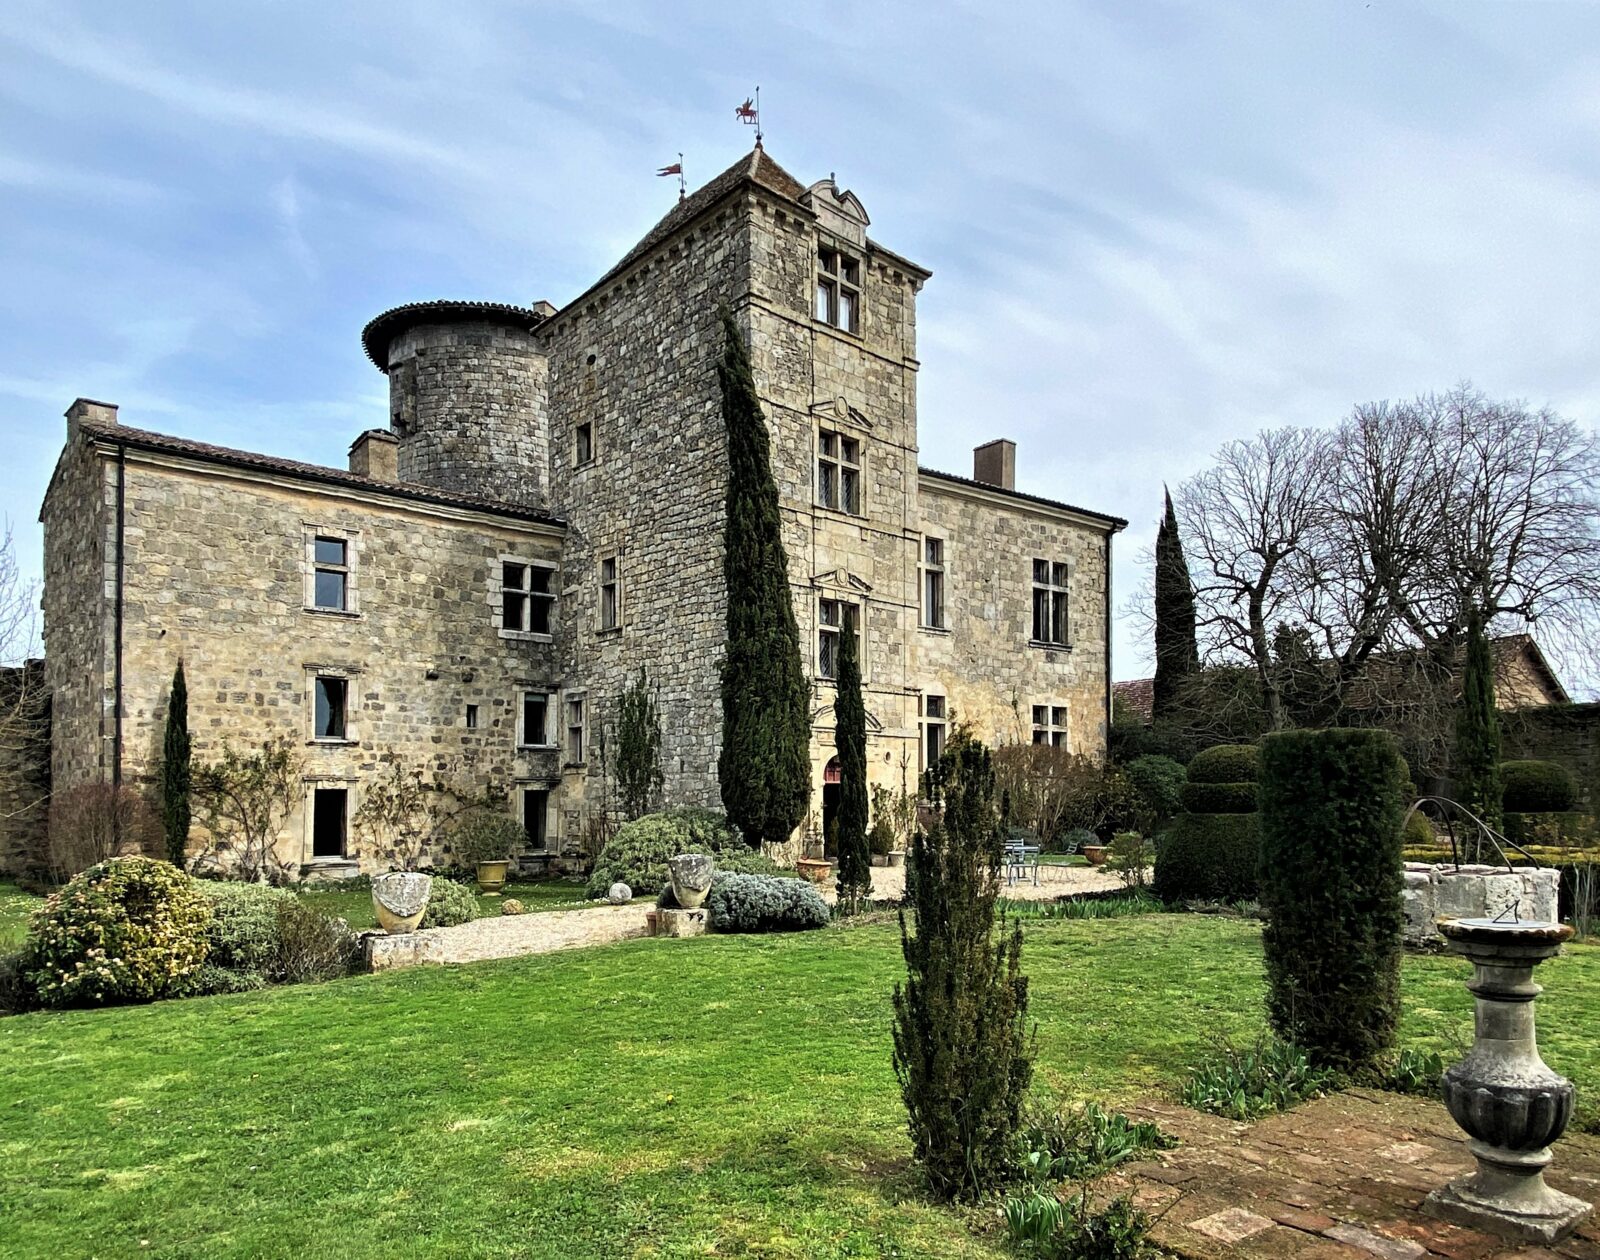 An historic chateau castle in Southwestern France